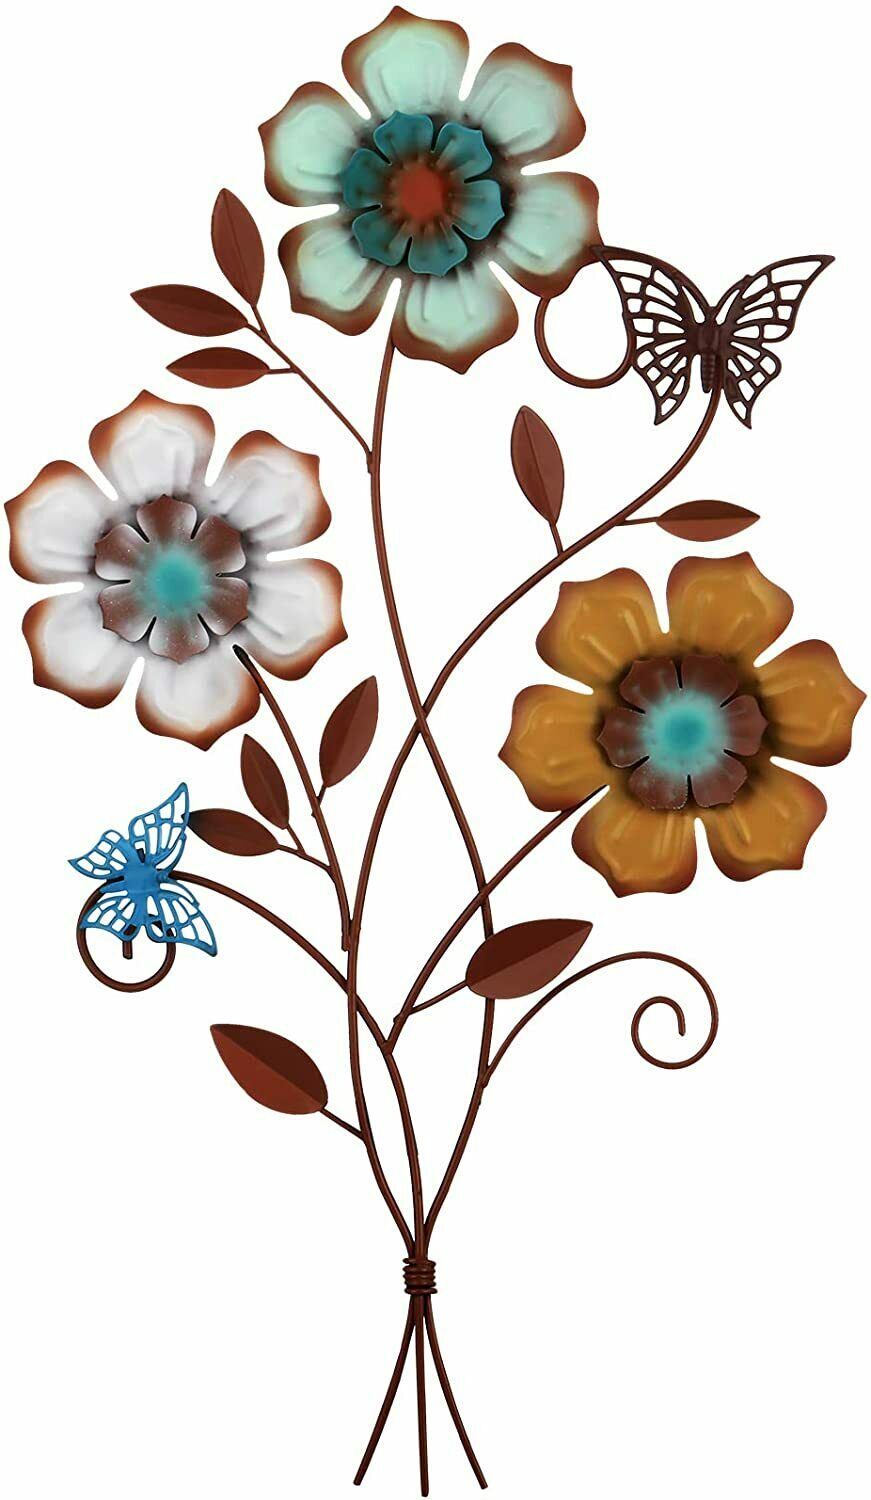 3-D Floral Rustic Farmhouse Metal Indoor Outdoor Art Sculpture | Decor Gifts and More